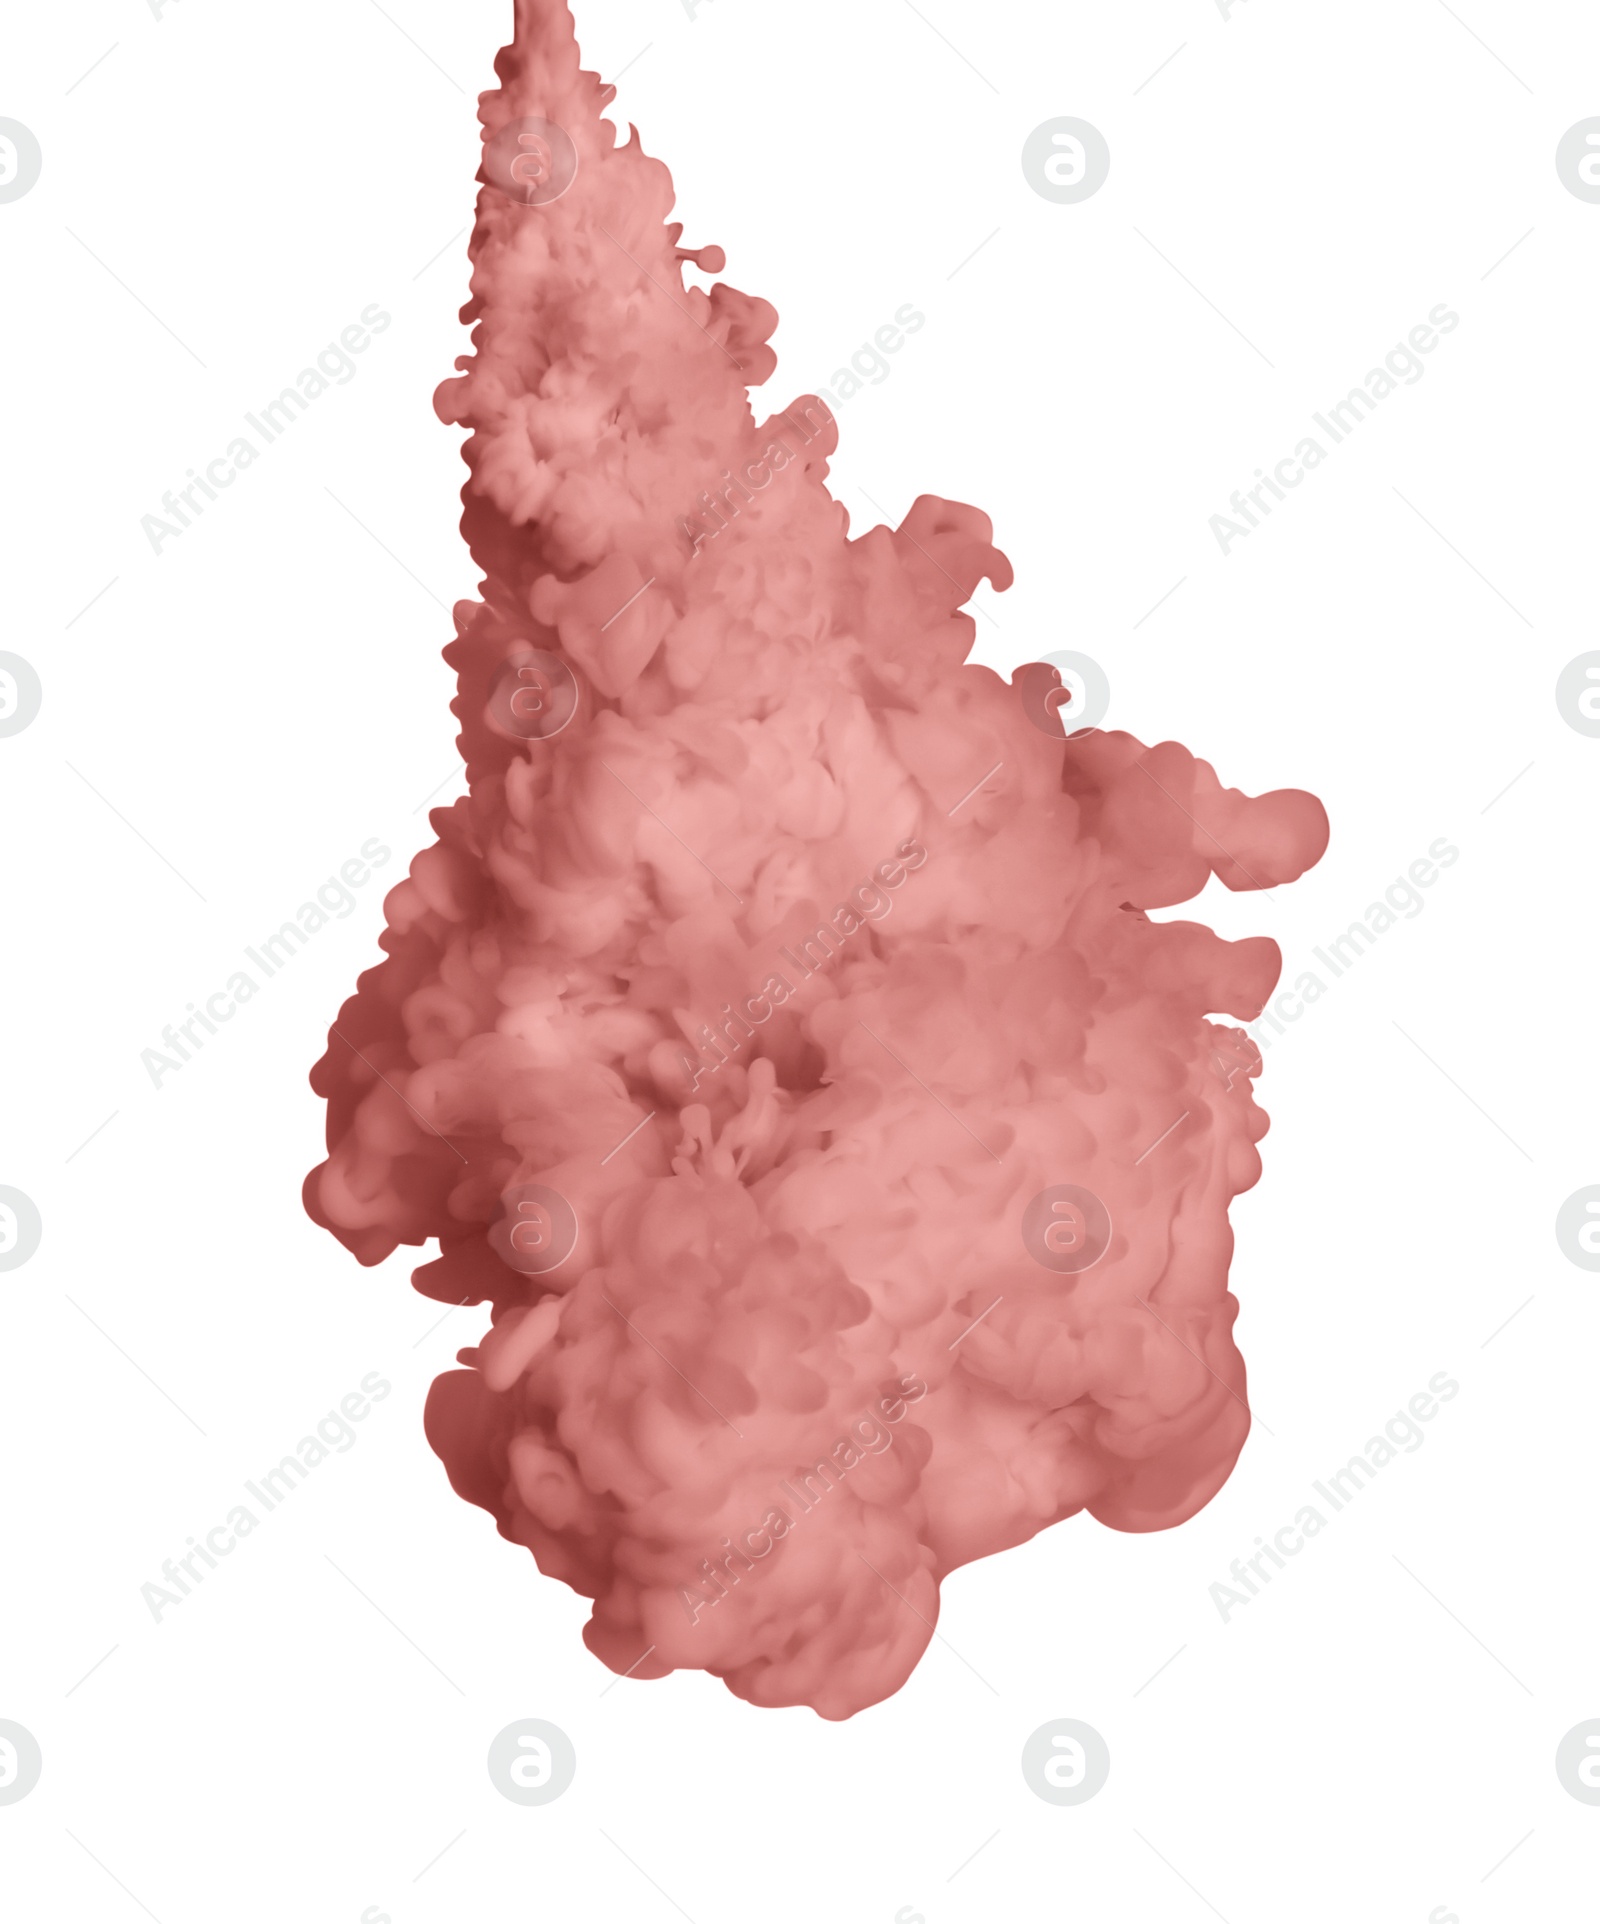 Photo of Splash of pale pink ink on white background